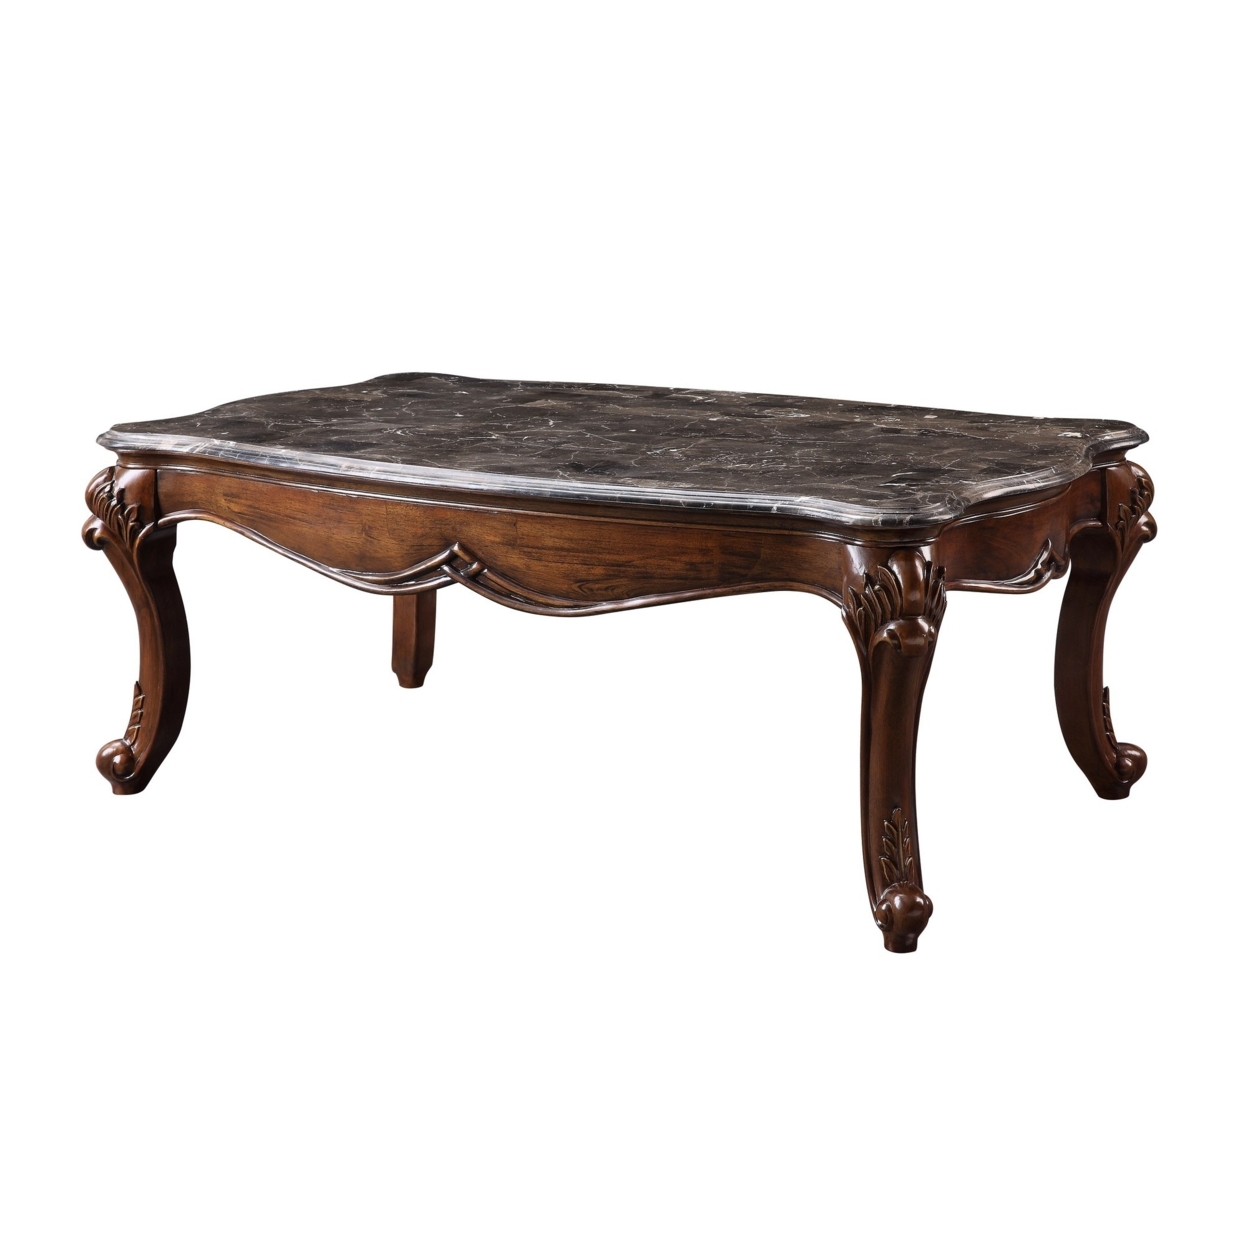 Coffee Table With Scalloped Marble Top And Anne Legs, Gray And Brown- Saltoro Sherpi